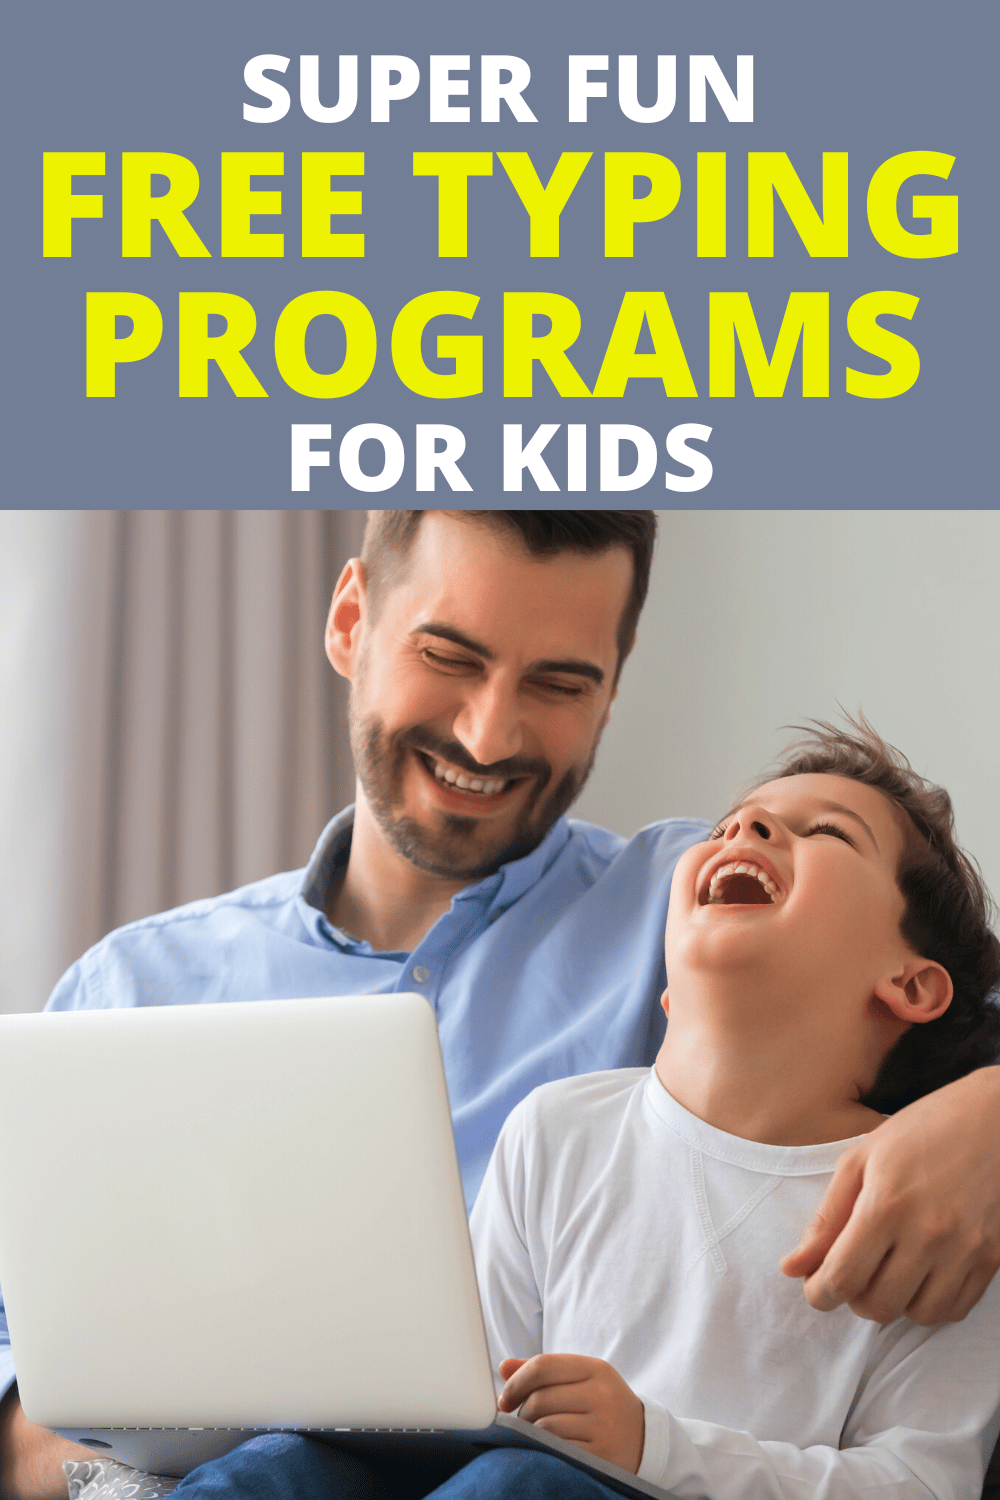 FREE TYPING PROGRAMS FOR KIDS BEST FREE TYPING LESSONS WEBSITE (typing course online for free) dad and son laughing at laptop playing free typing games